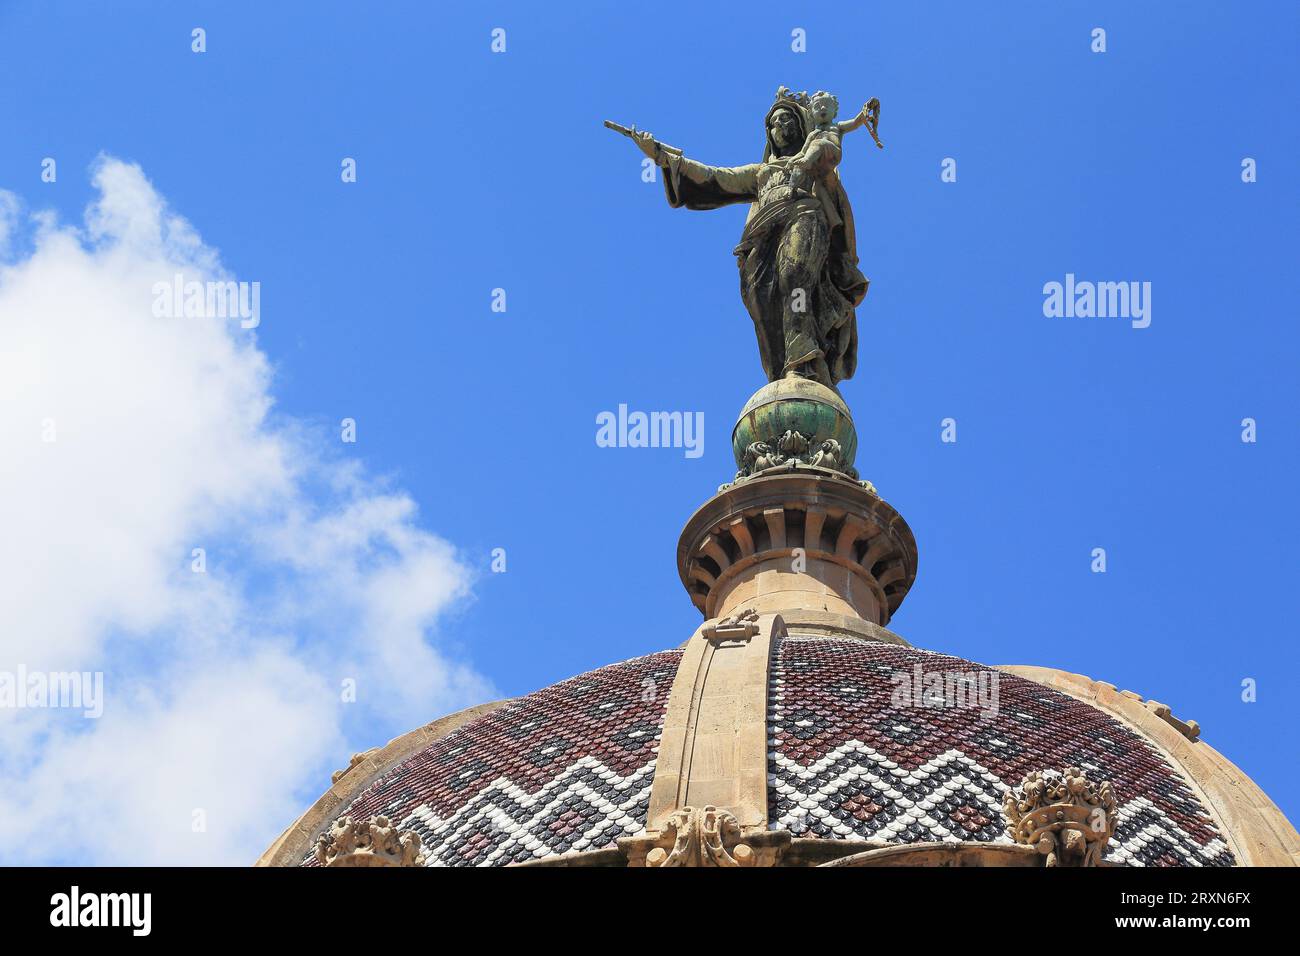 BARCELONA, SPAIN - MAY 11, 2017: This is a huge bronze figure of the Virgin and Child, crowning the dome of the Basilica de la Merce. Stock Photo